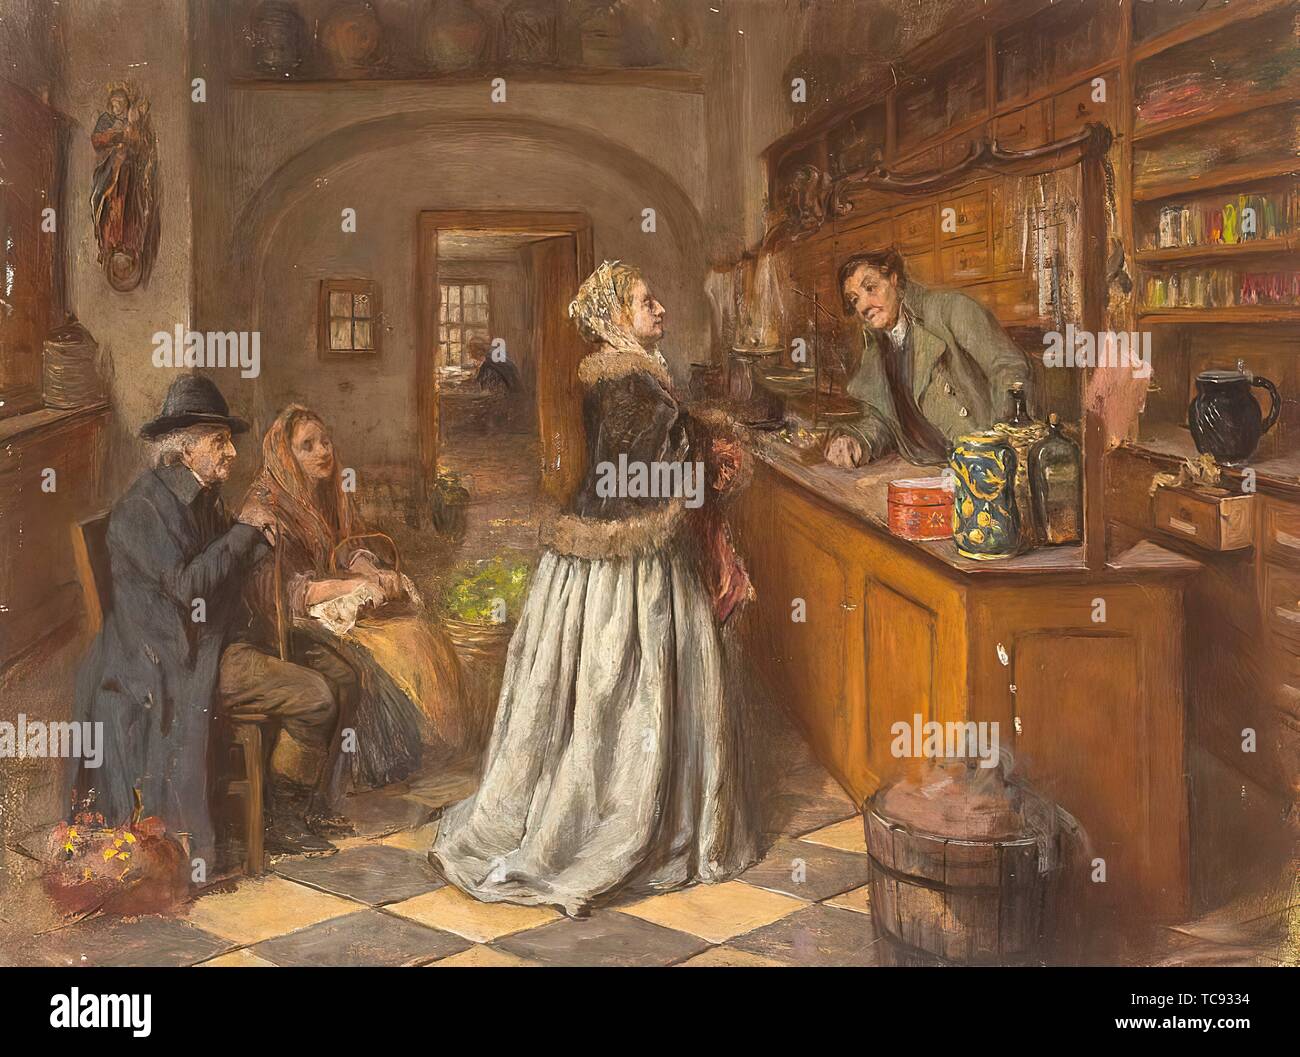 Anna Marie Wirth. 'Blick in eine Apotheke mit wartenden Kunden und Apotheker' (View in a pharmacy with waiting customers and pharmacist) Stock Photo